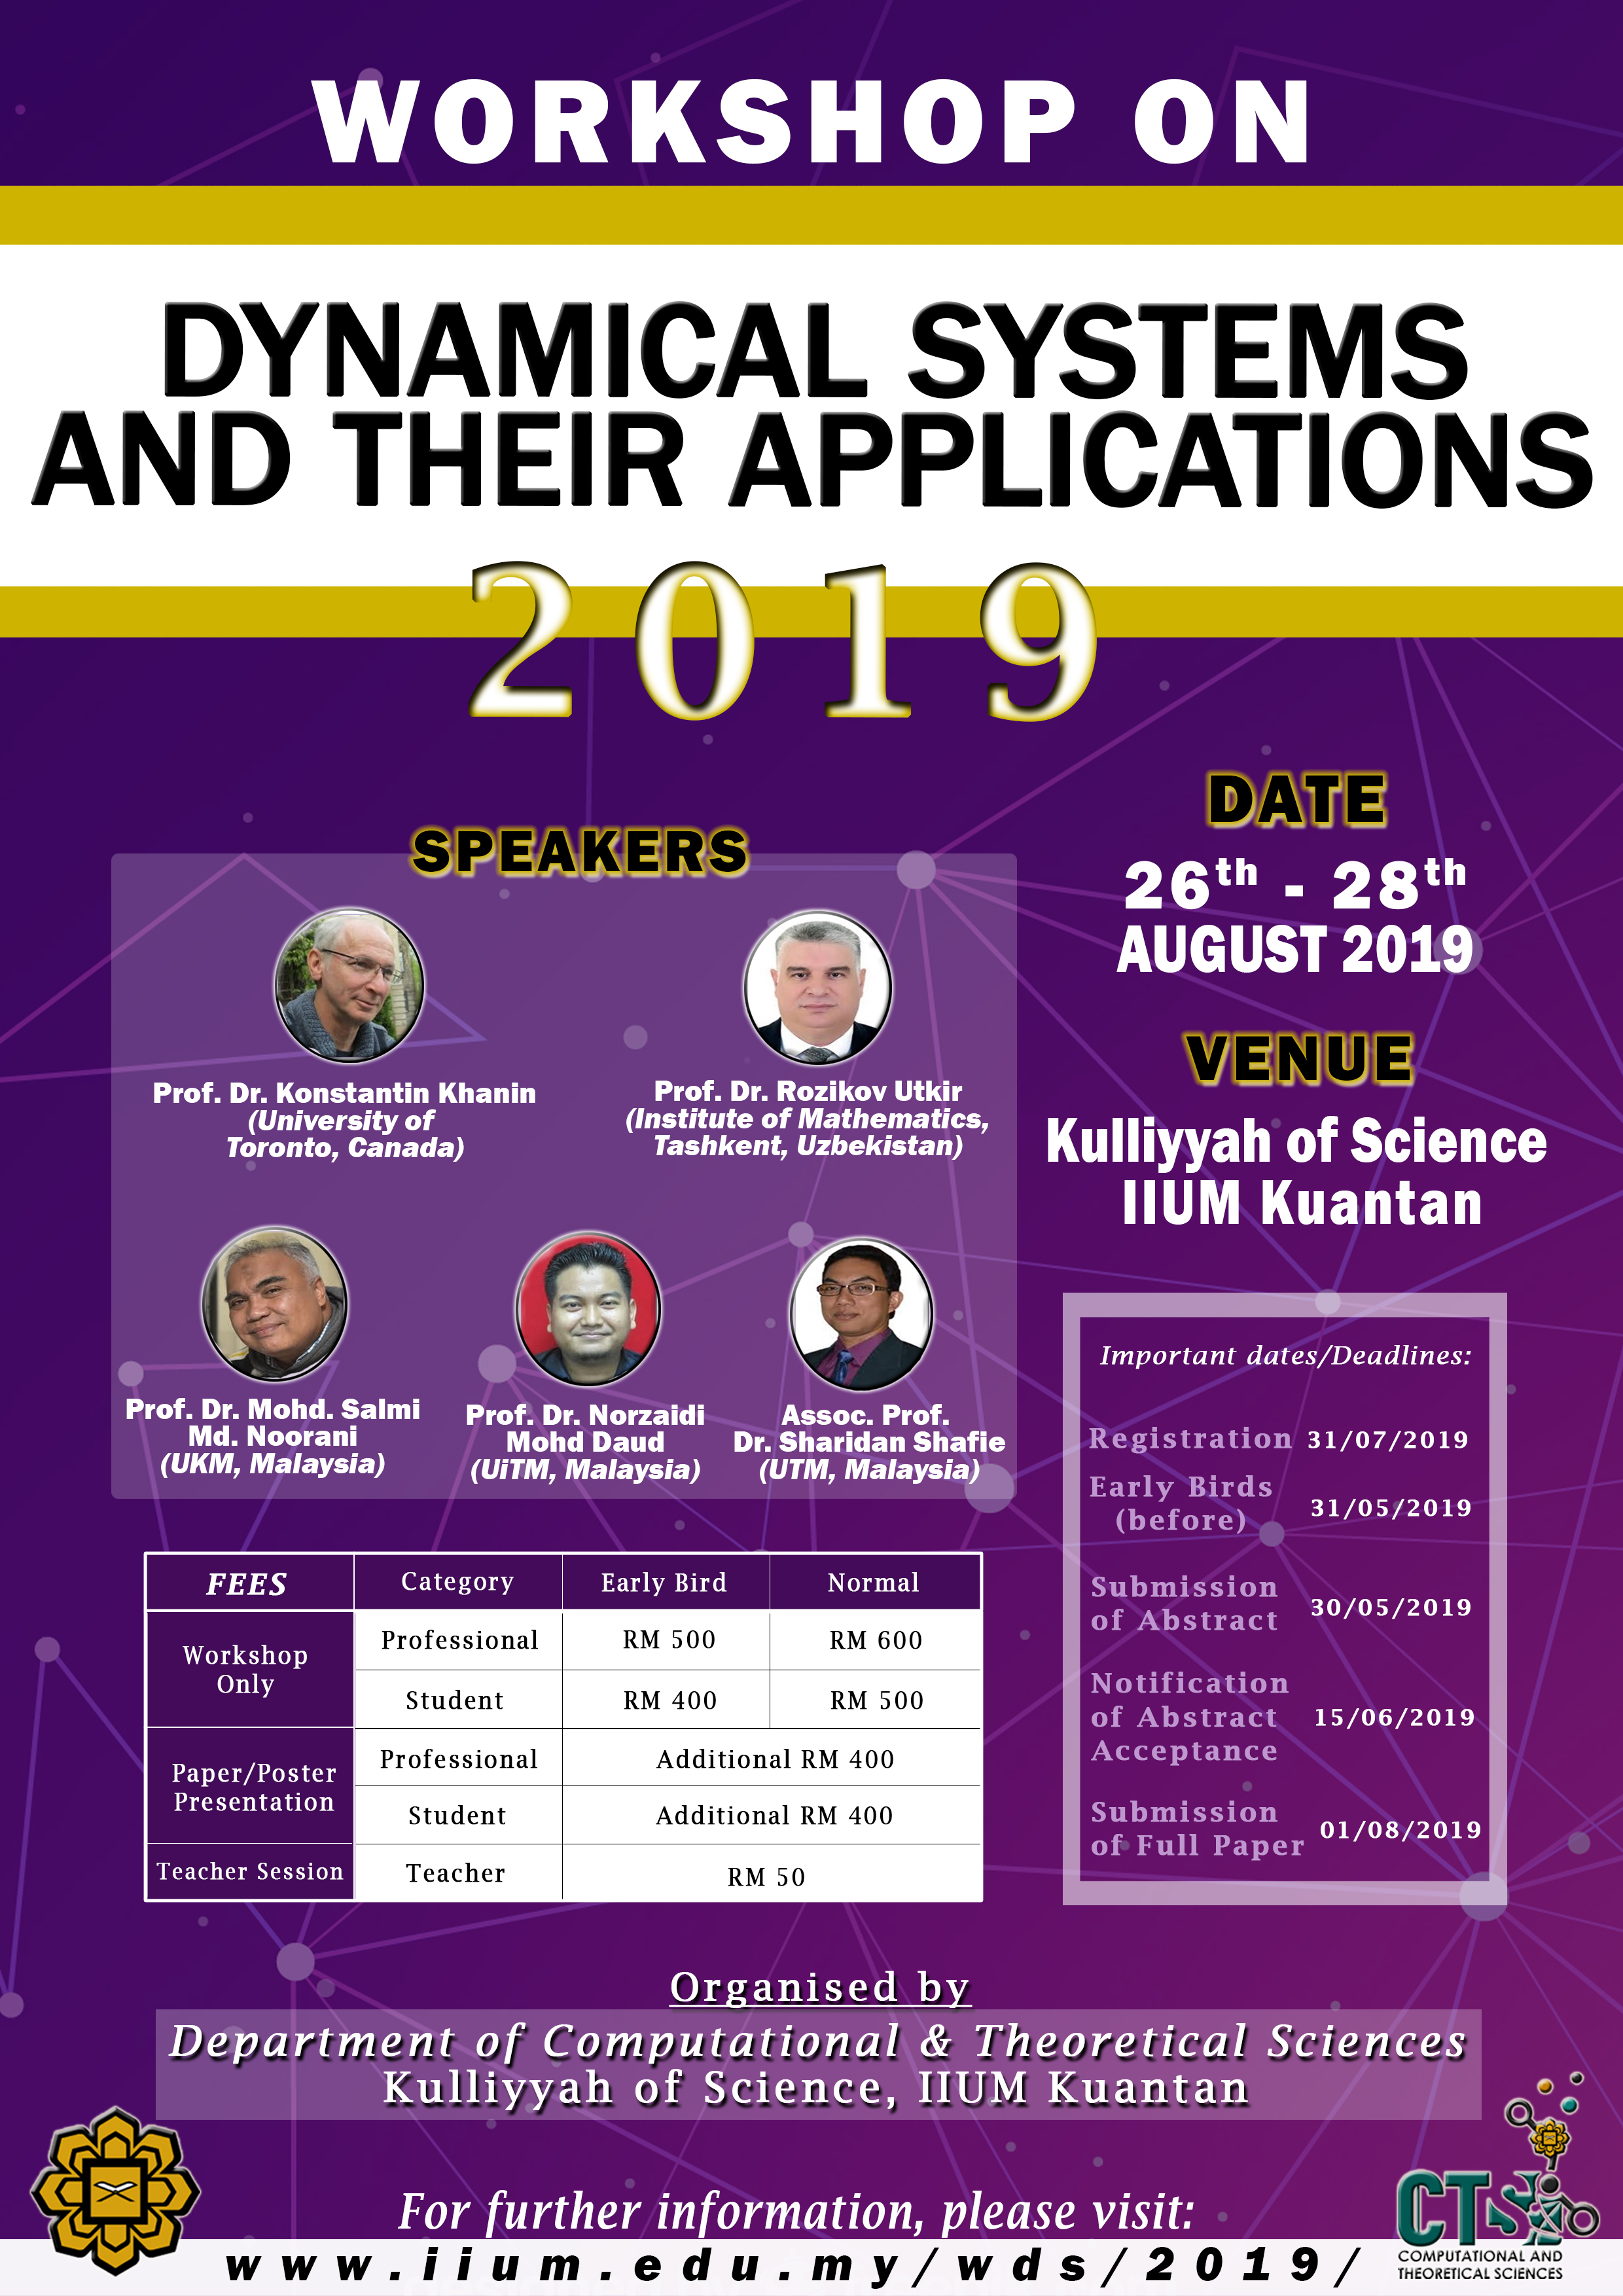 THE WORKSHOP ON DYNAMICAL SYSTEMS AND THEIR APPLICATIONS 2019 (WDS 2019)